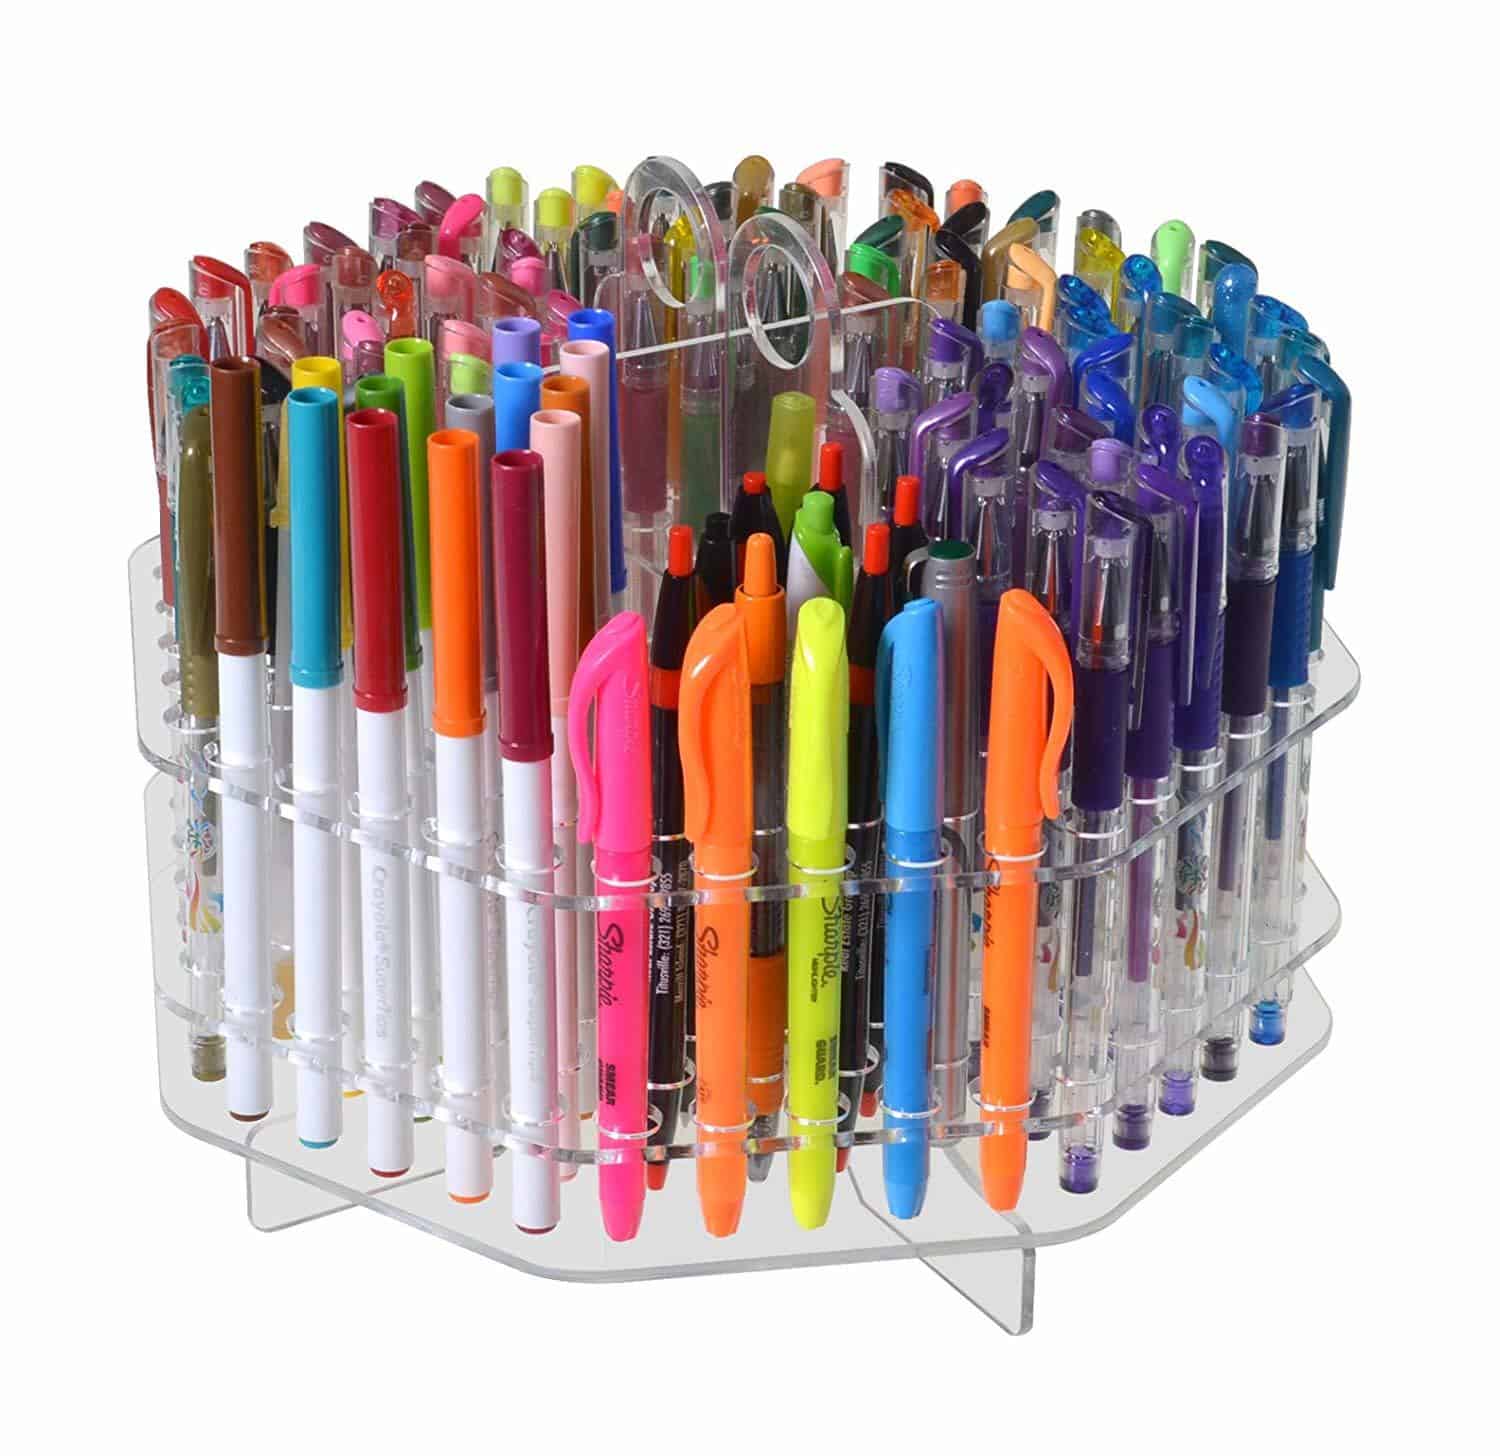 How To Store Sharpies